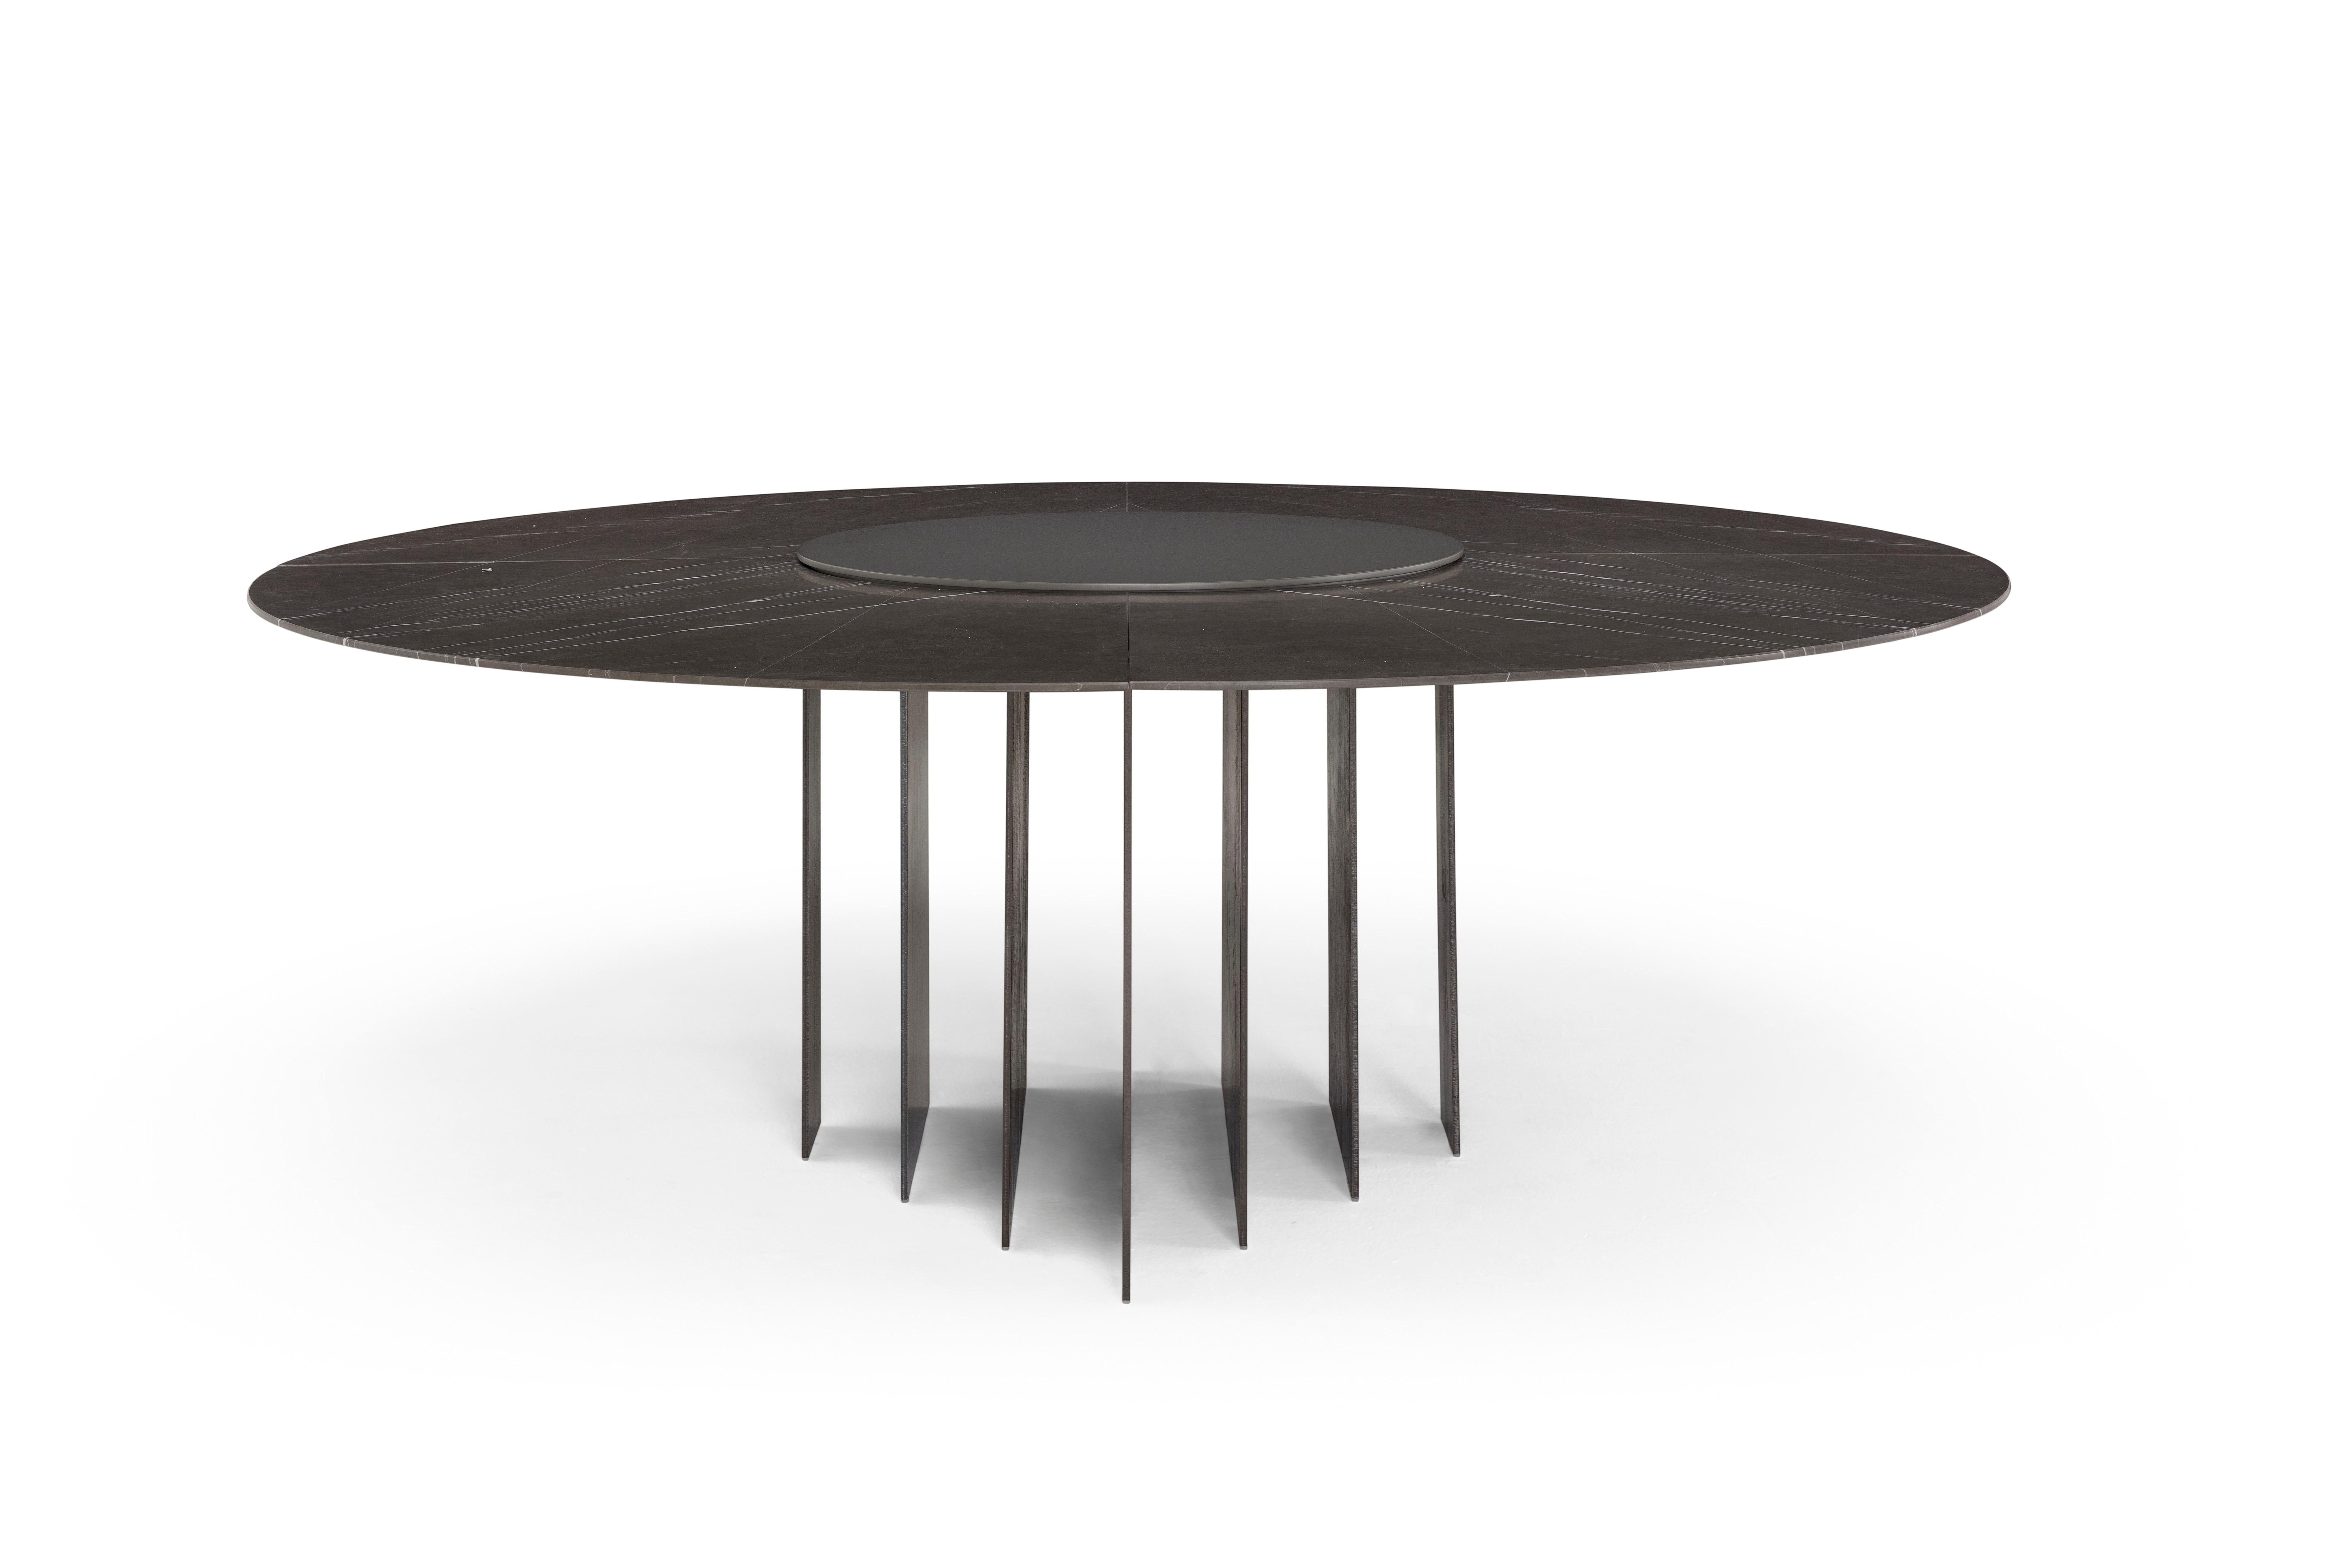 Exilis coffee table with metal feet and black marble top.
     